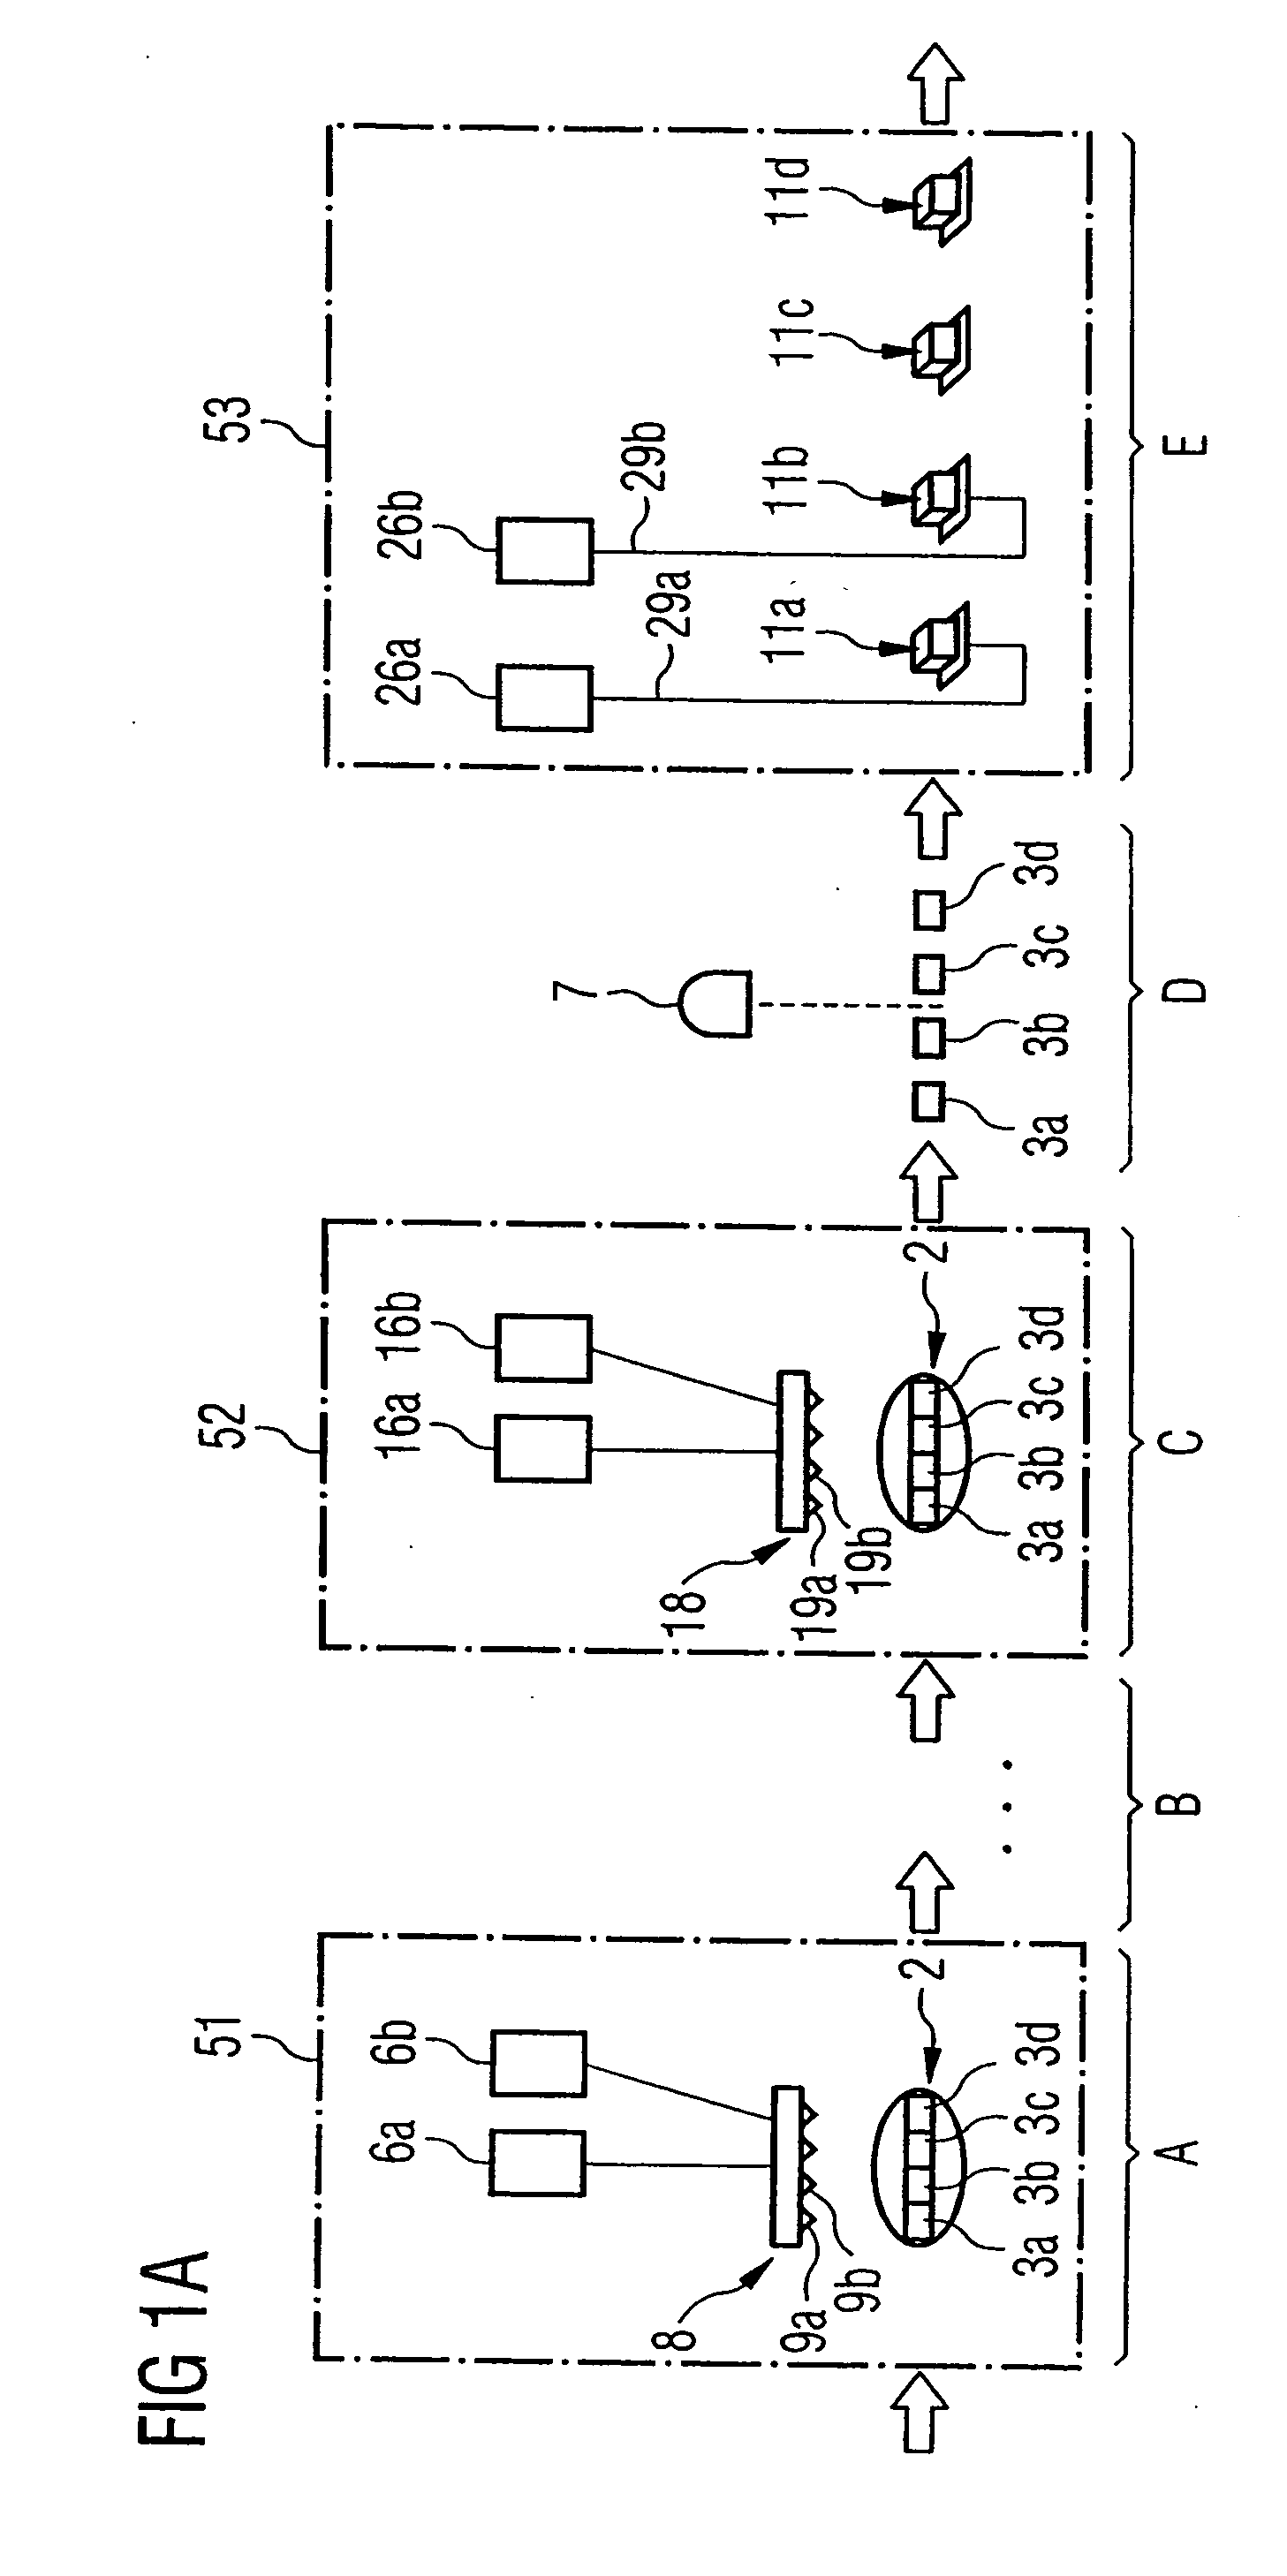 Semiconductor component with internal heating